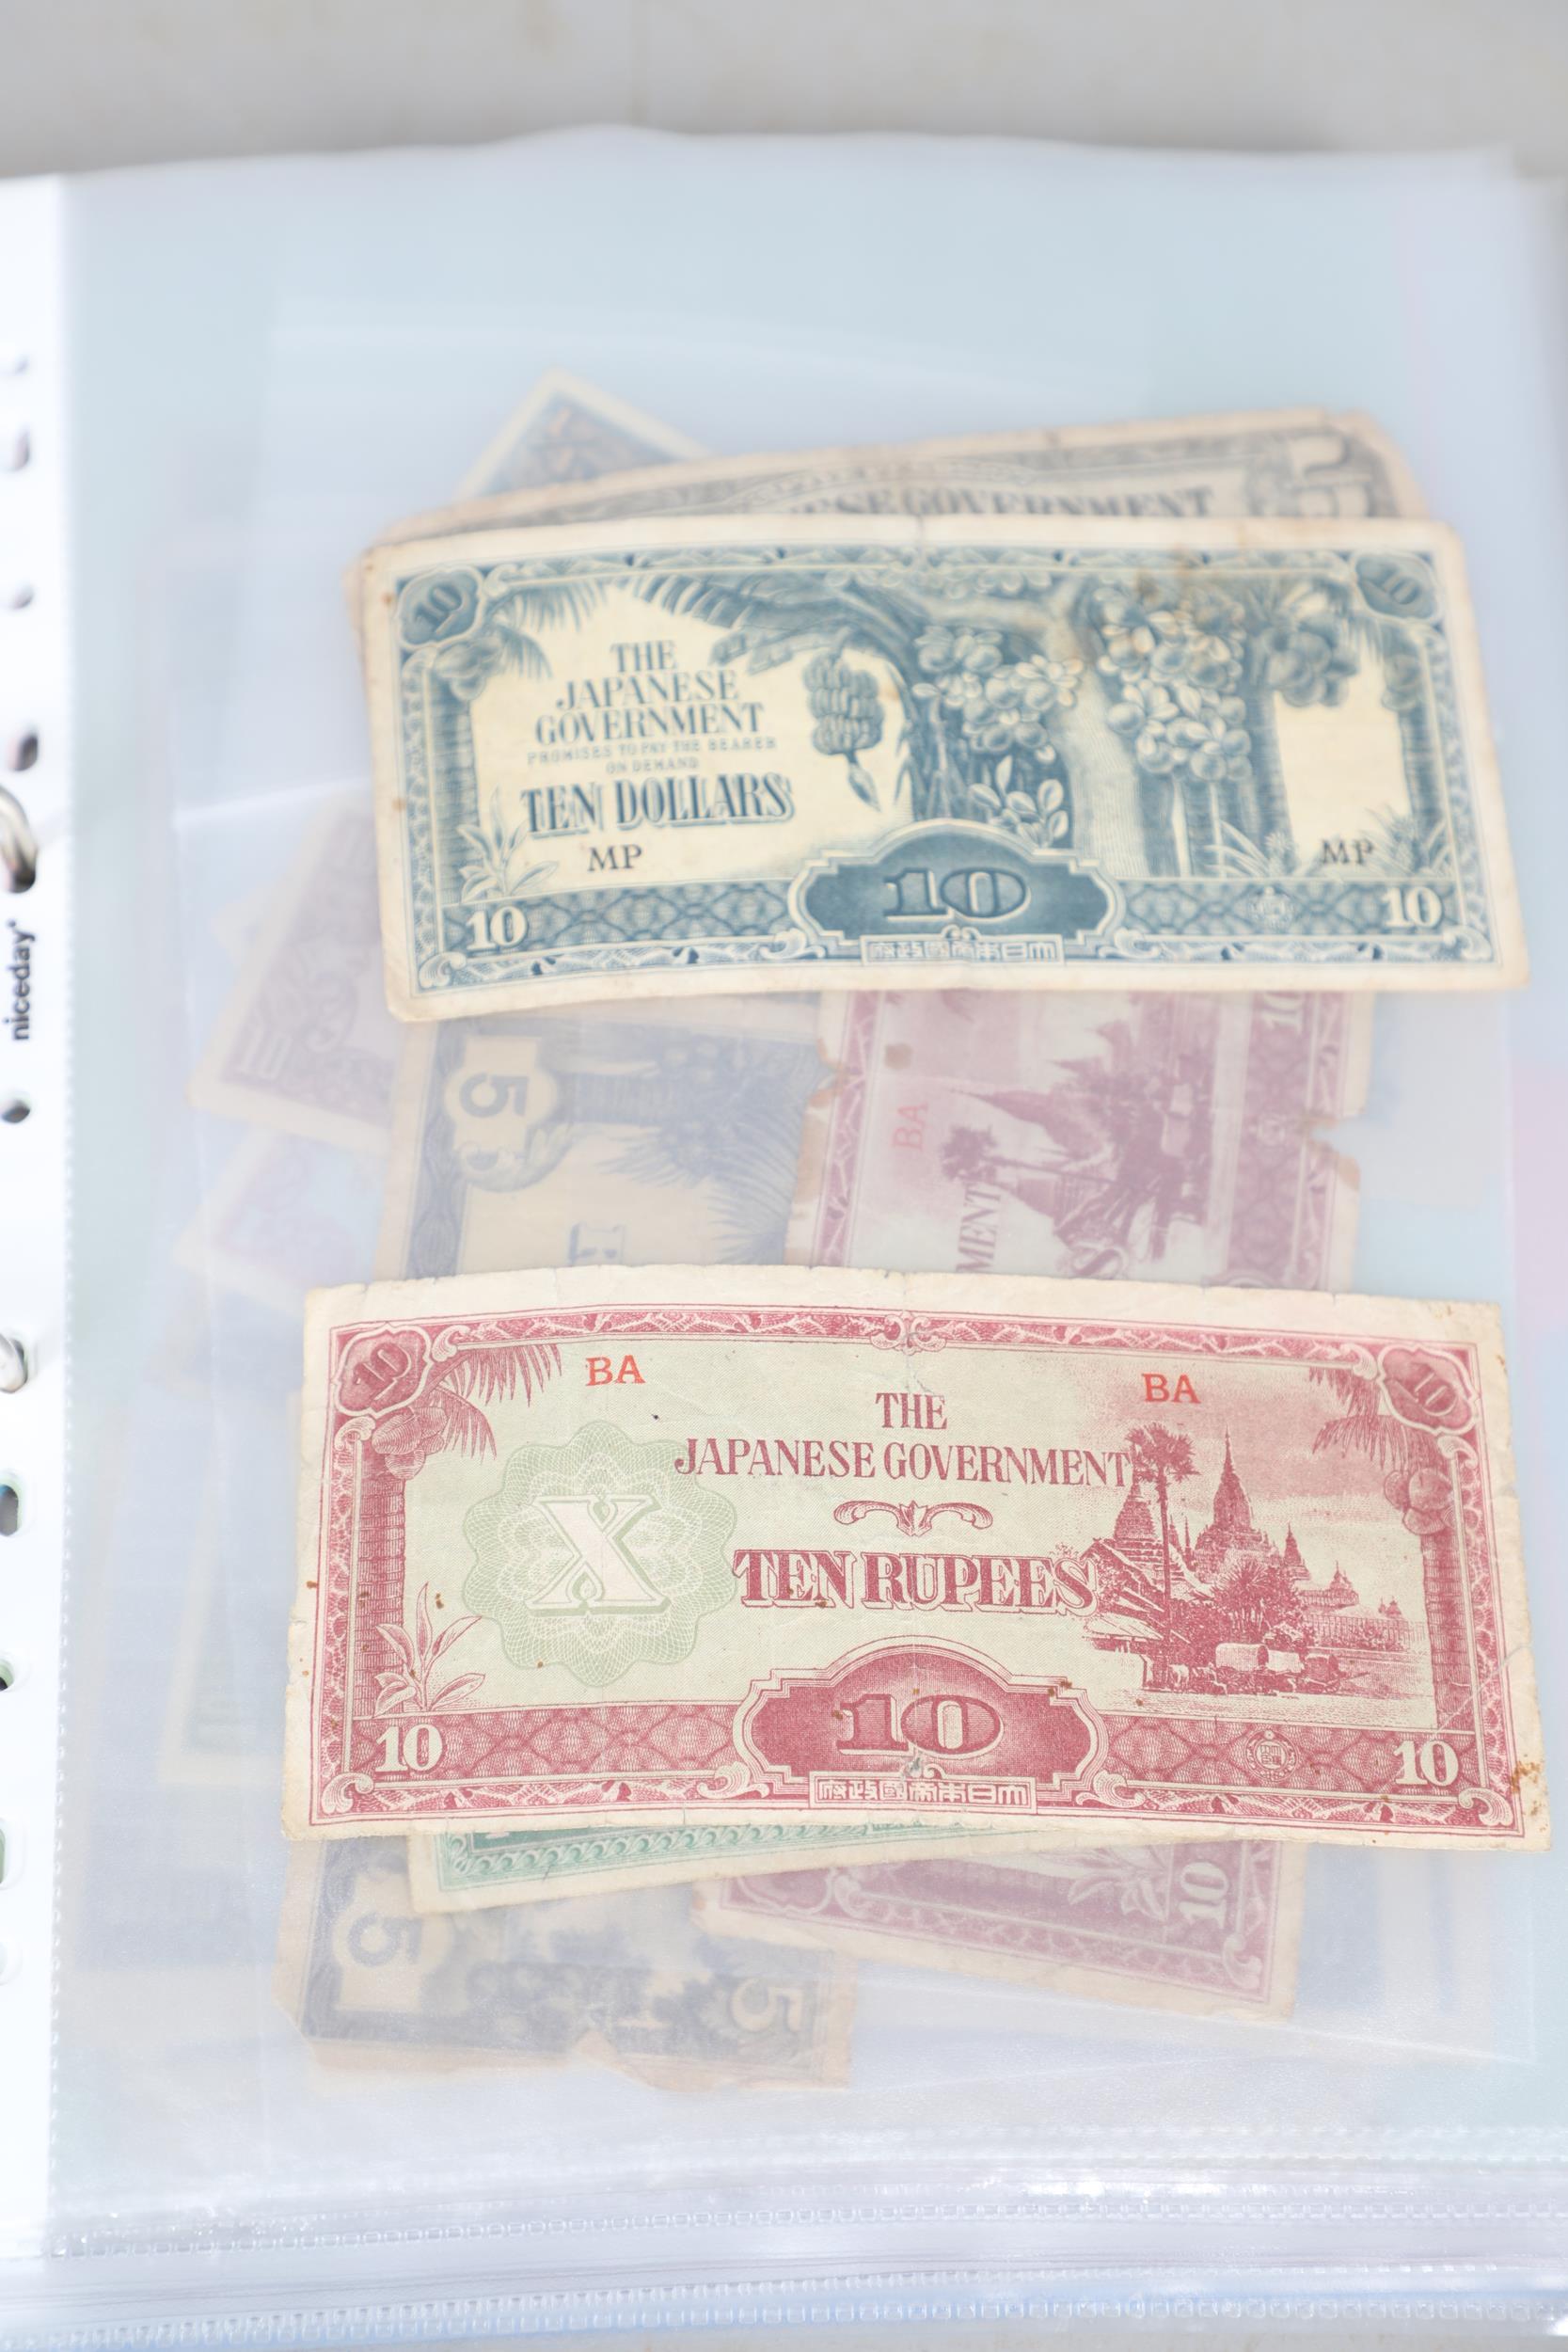 AN EXTENSIVE COLLECTION OF WORLD BANKNOTES. - Image 31 of 56